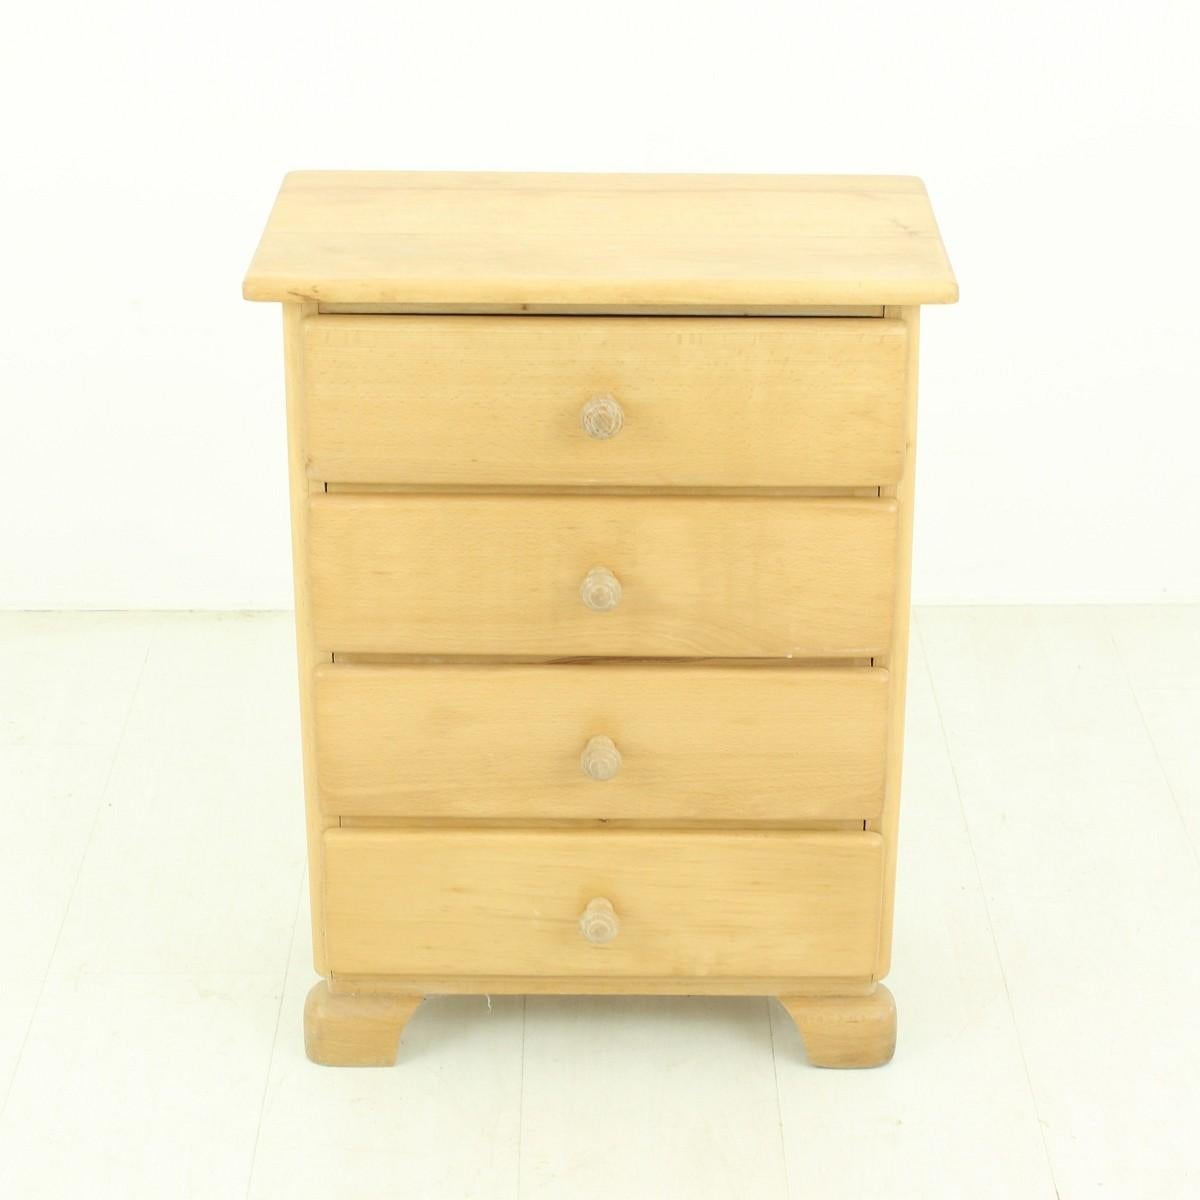 This chest of drawers is made from solid beech.